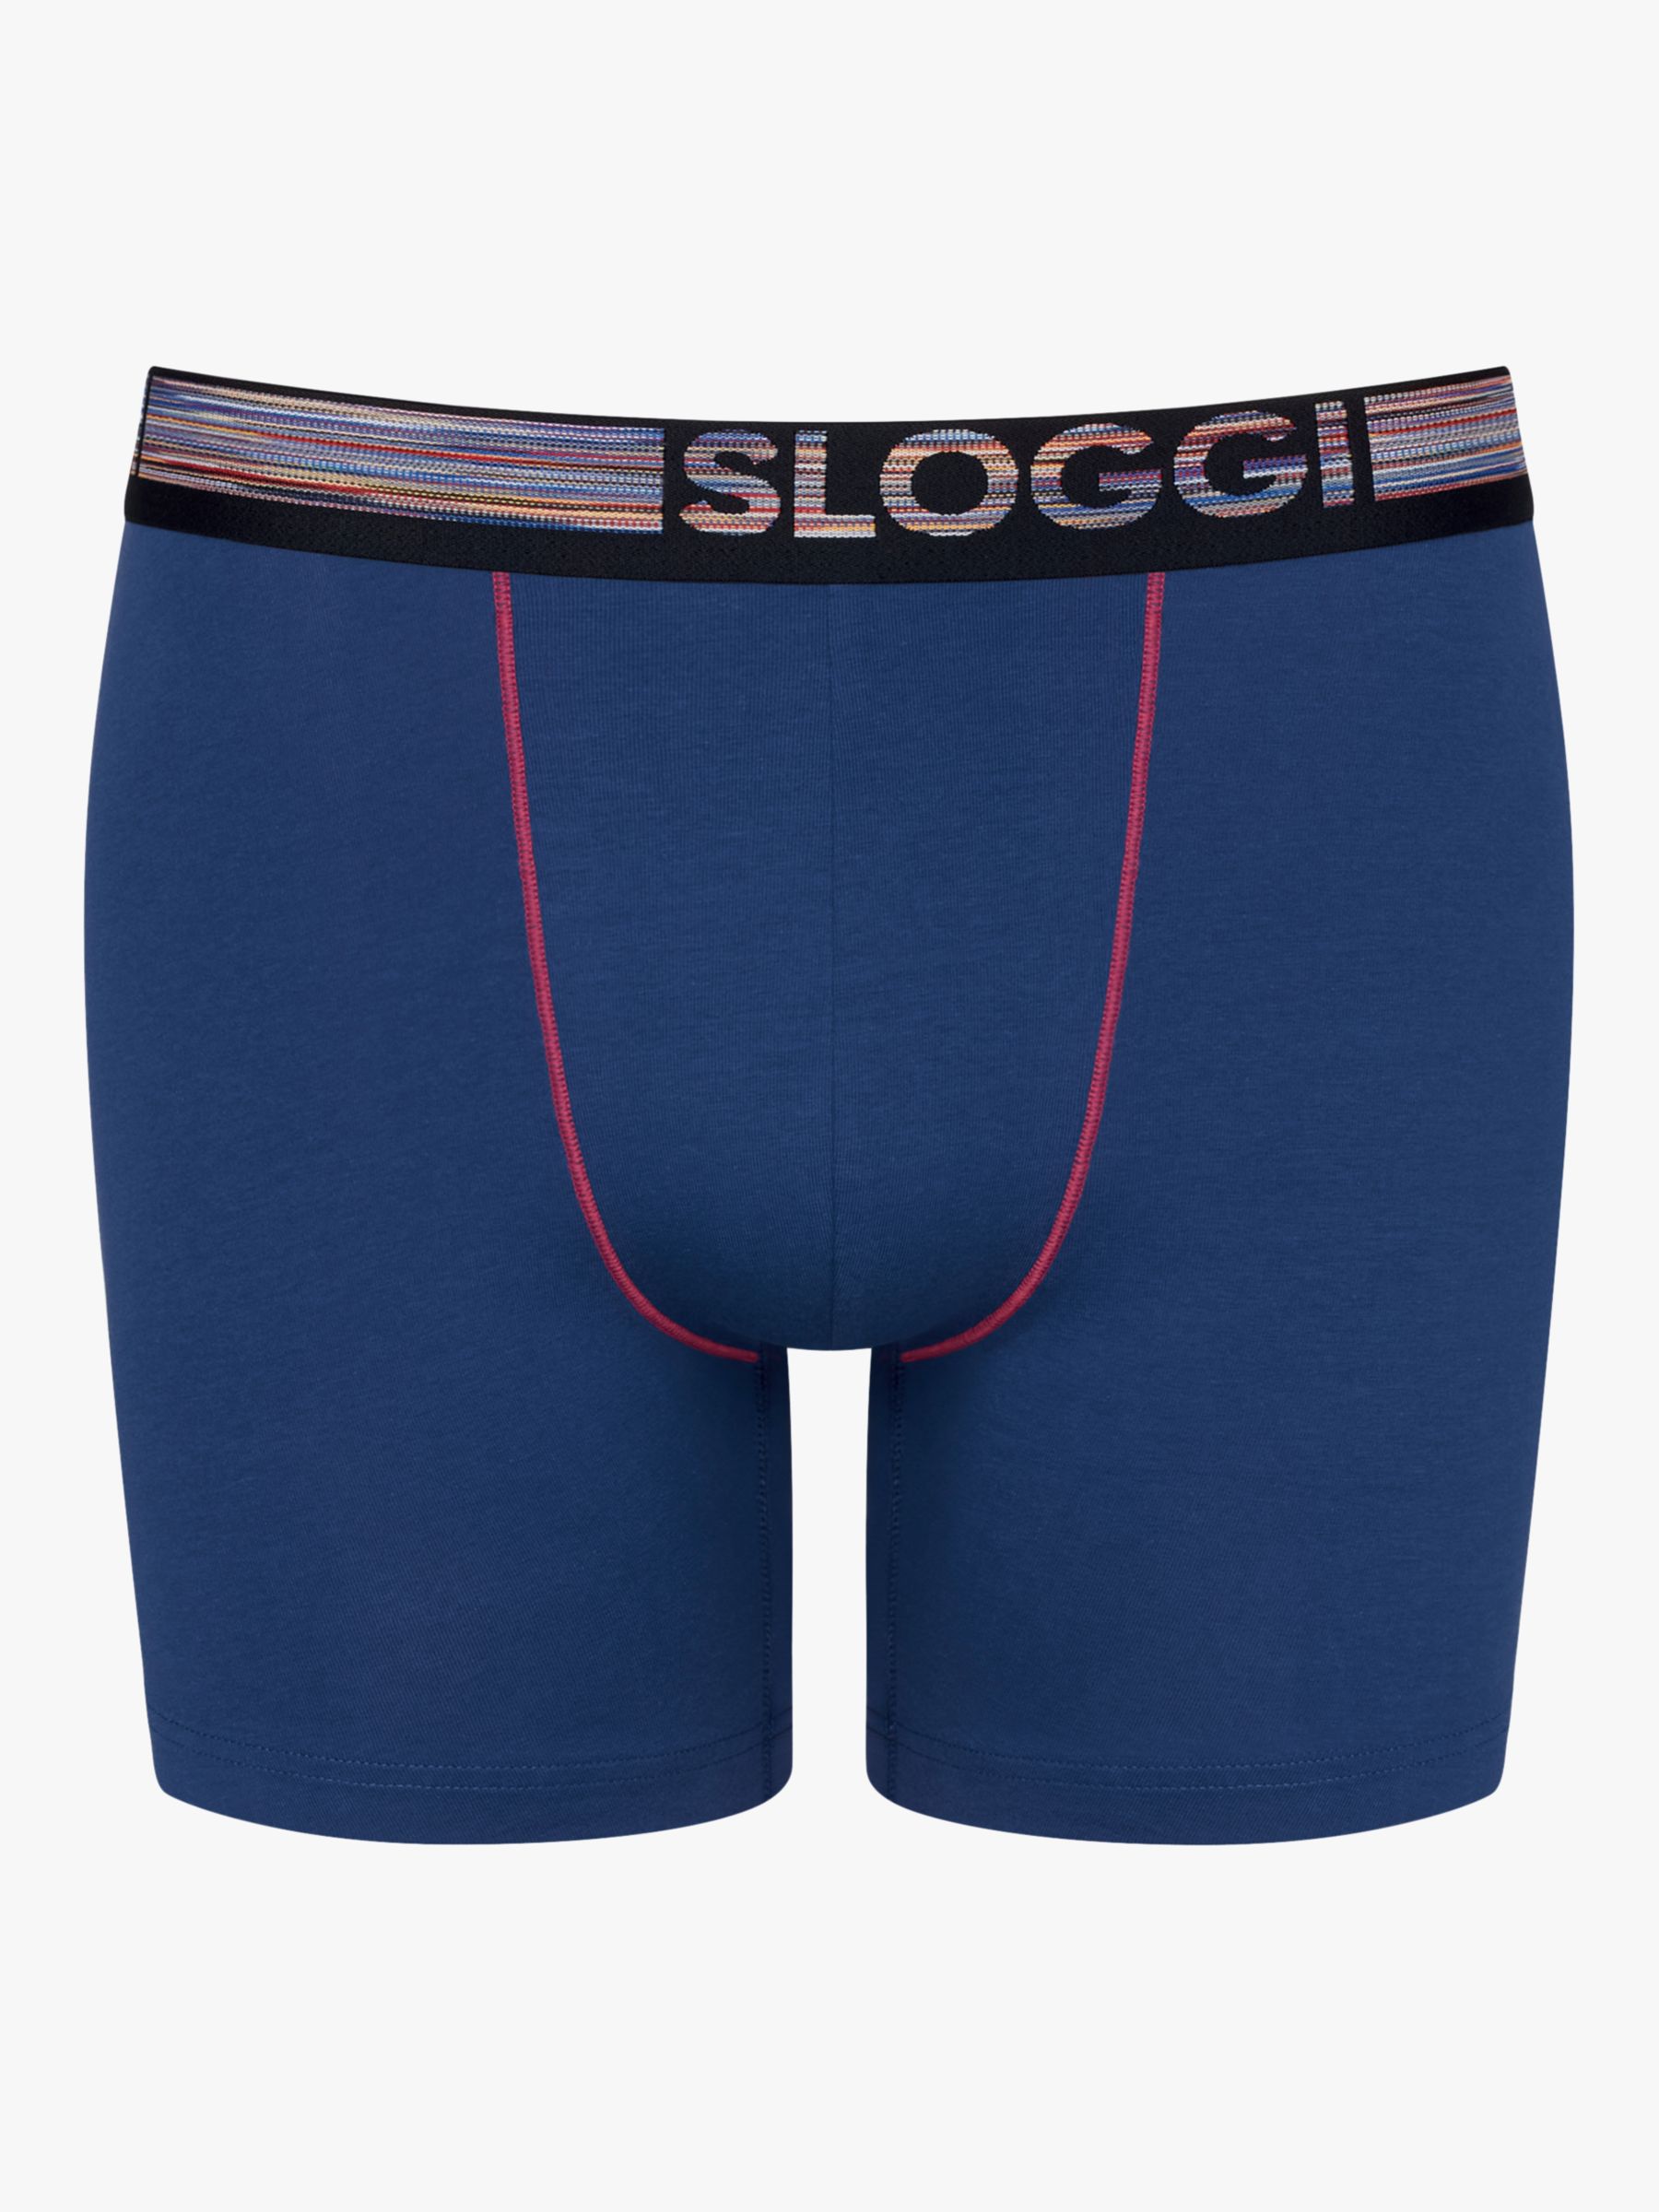 Buy sloggi GO ABC Natural Cotton Stretch Hipster Trunks, Pack of 2 Online at johnlewis.com